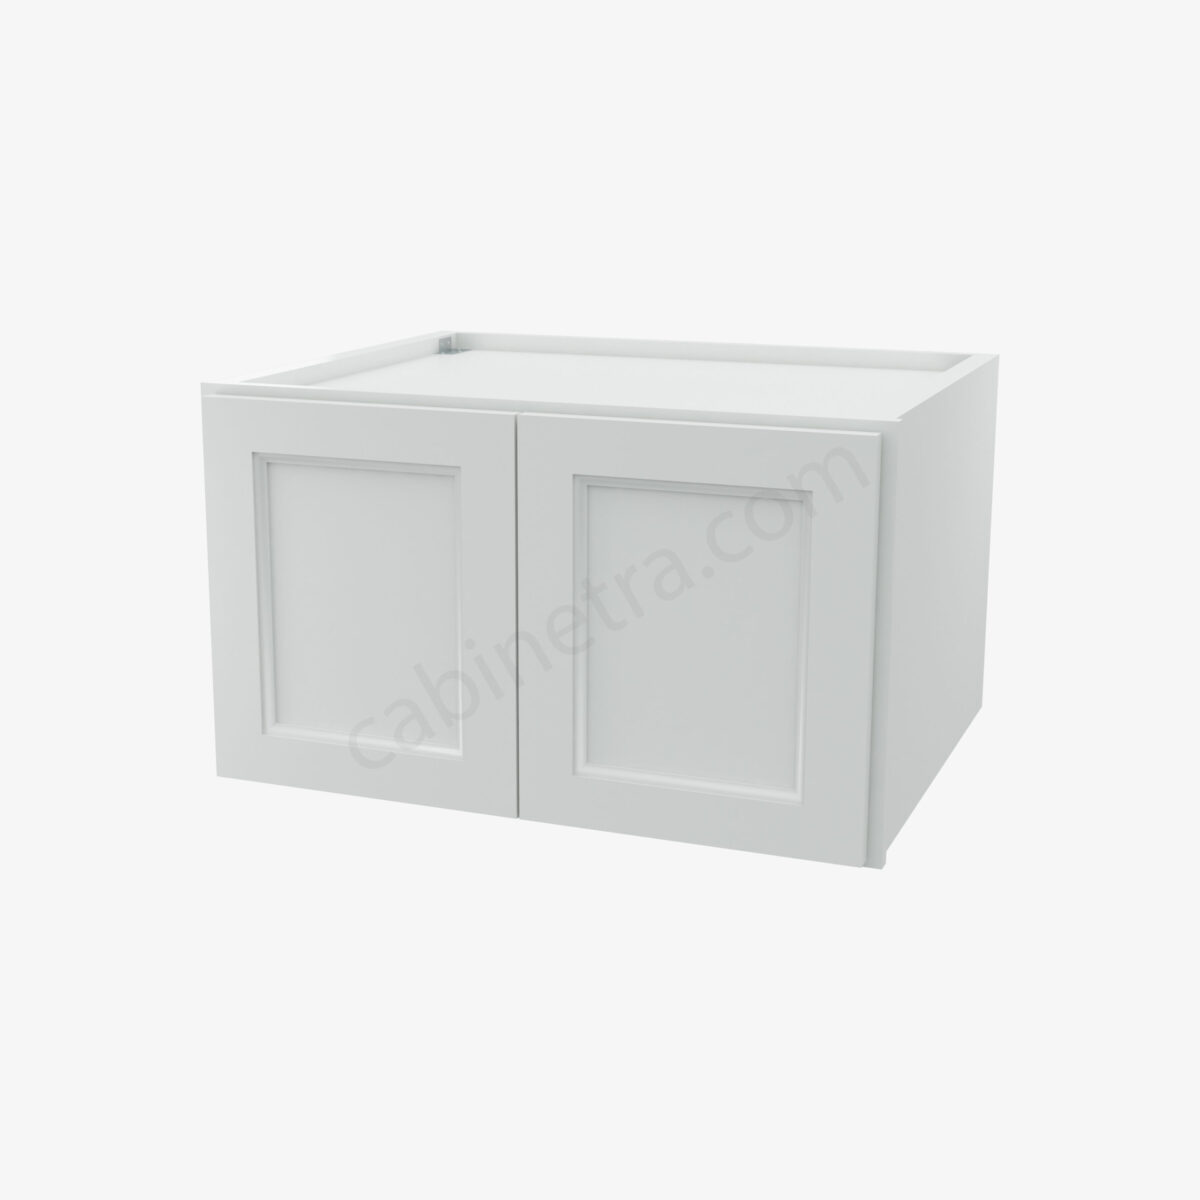 TW W301824B 0 Forevermark Uptown White Cabinetra scaled